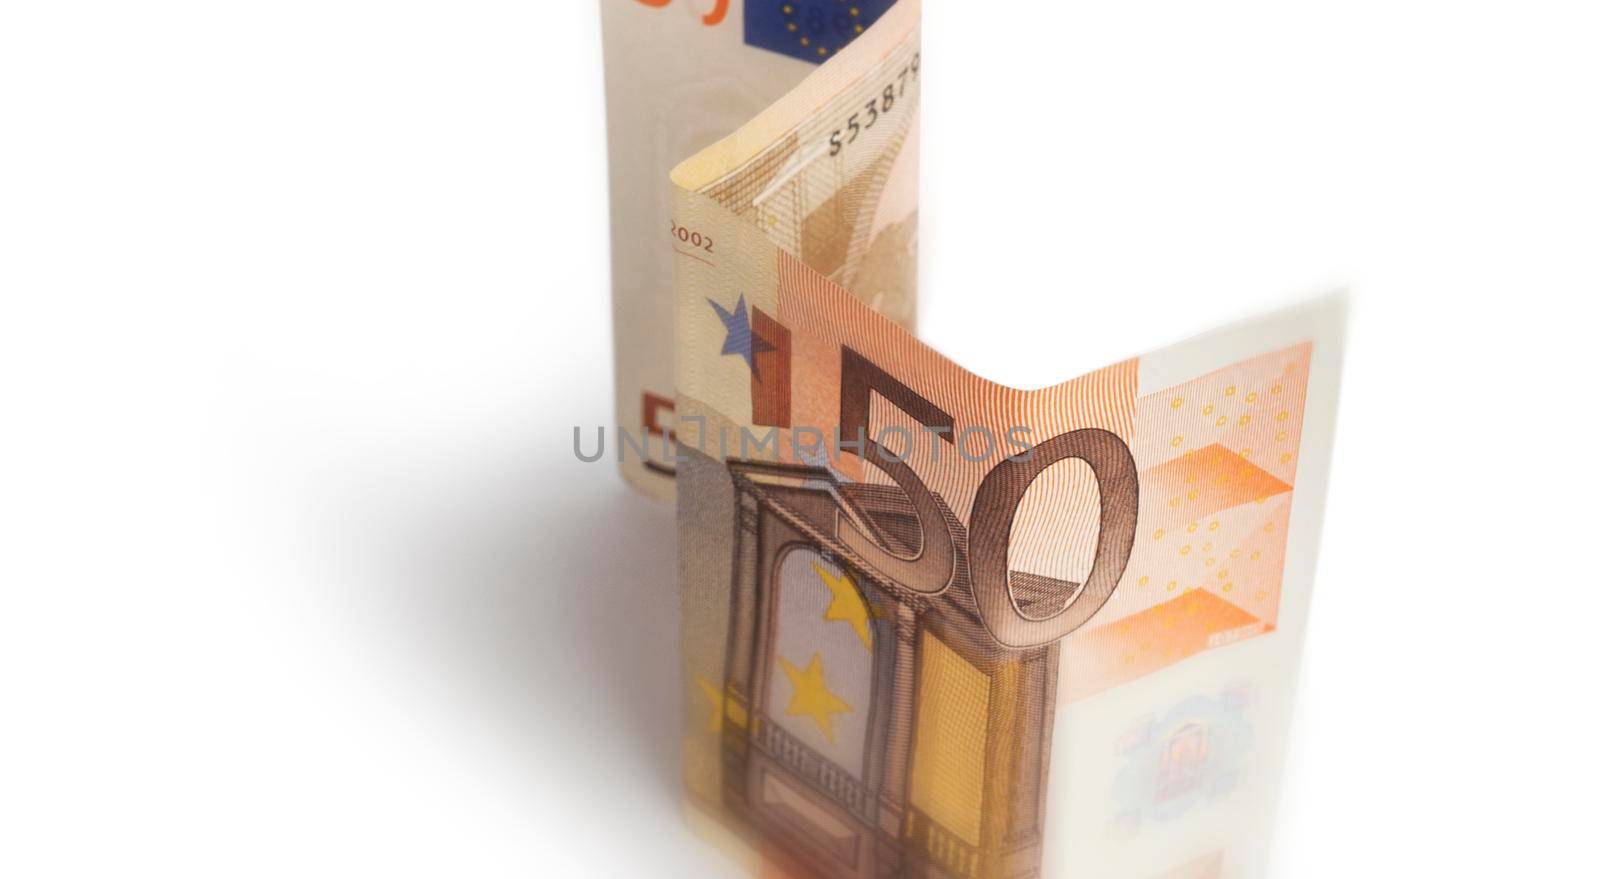 fifty euro banknote, isolated on white with clipping path. by SlayCer